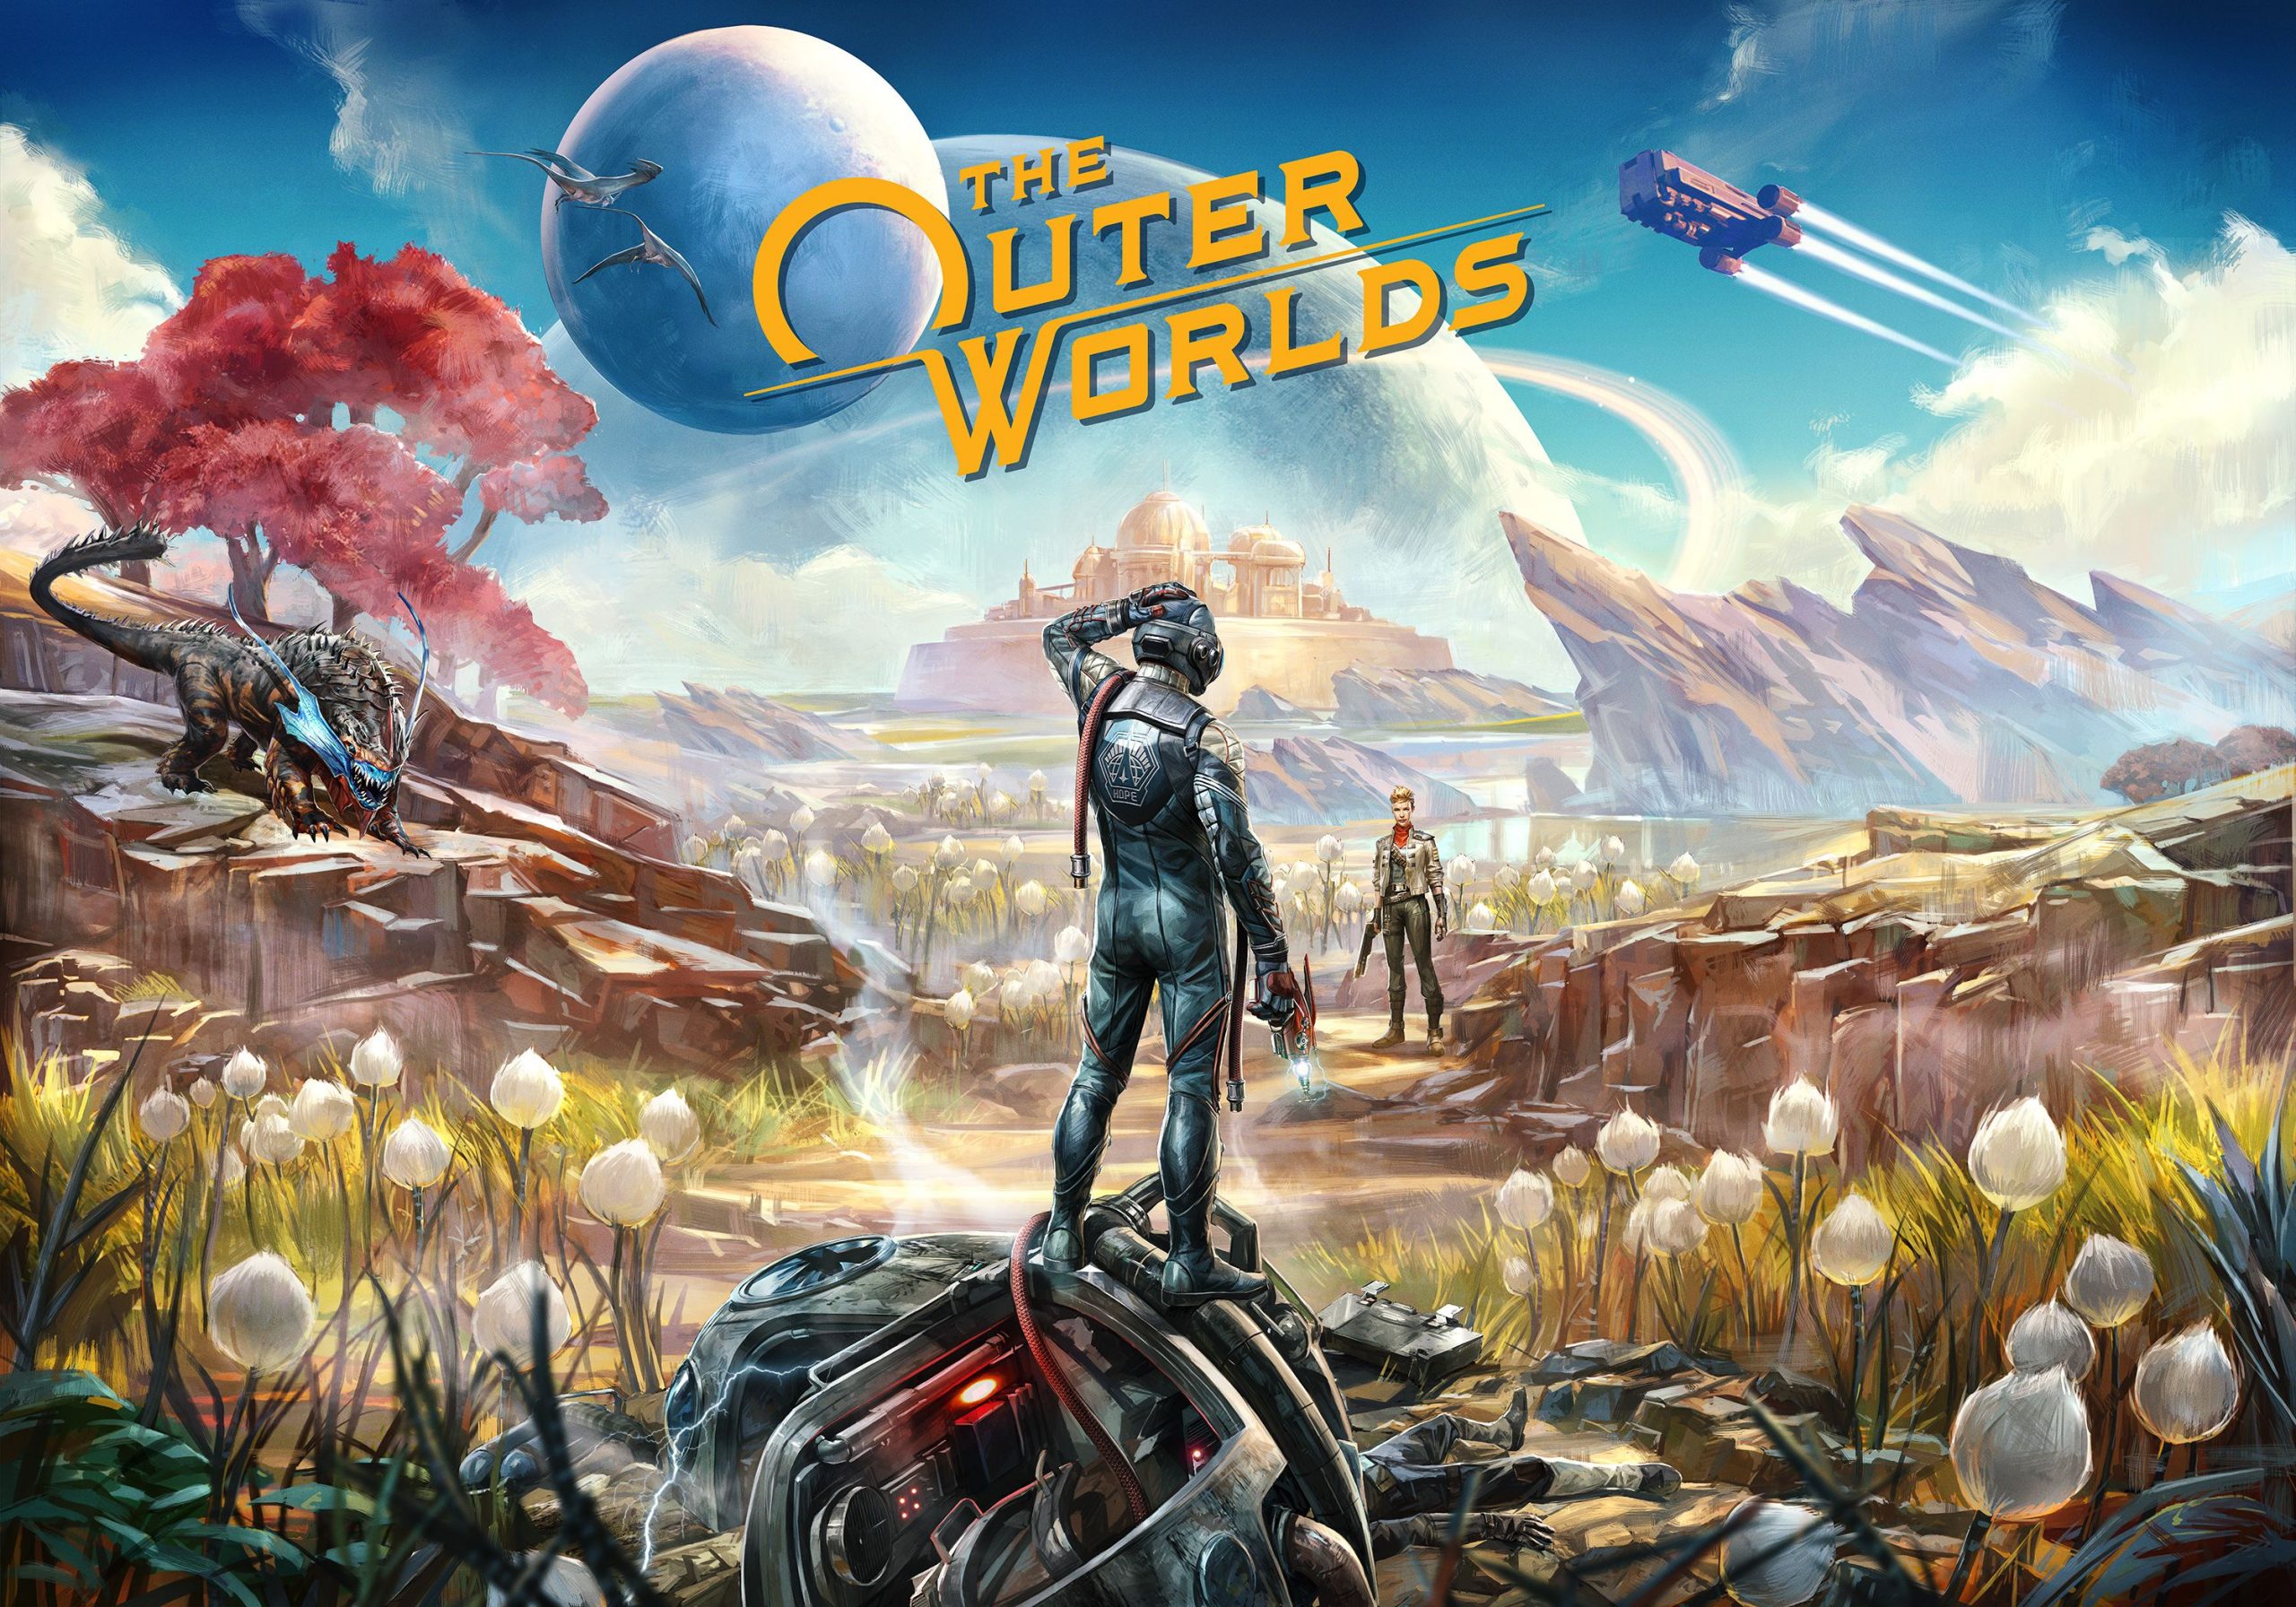 The Outer Worlds for Nintendo Switch